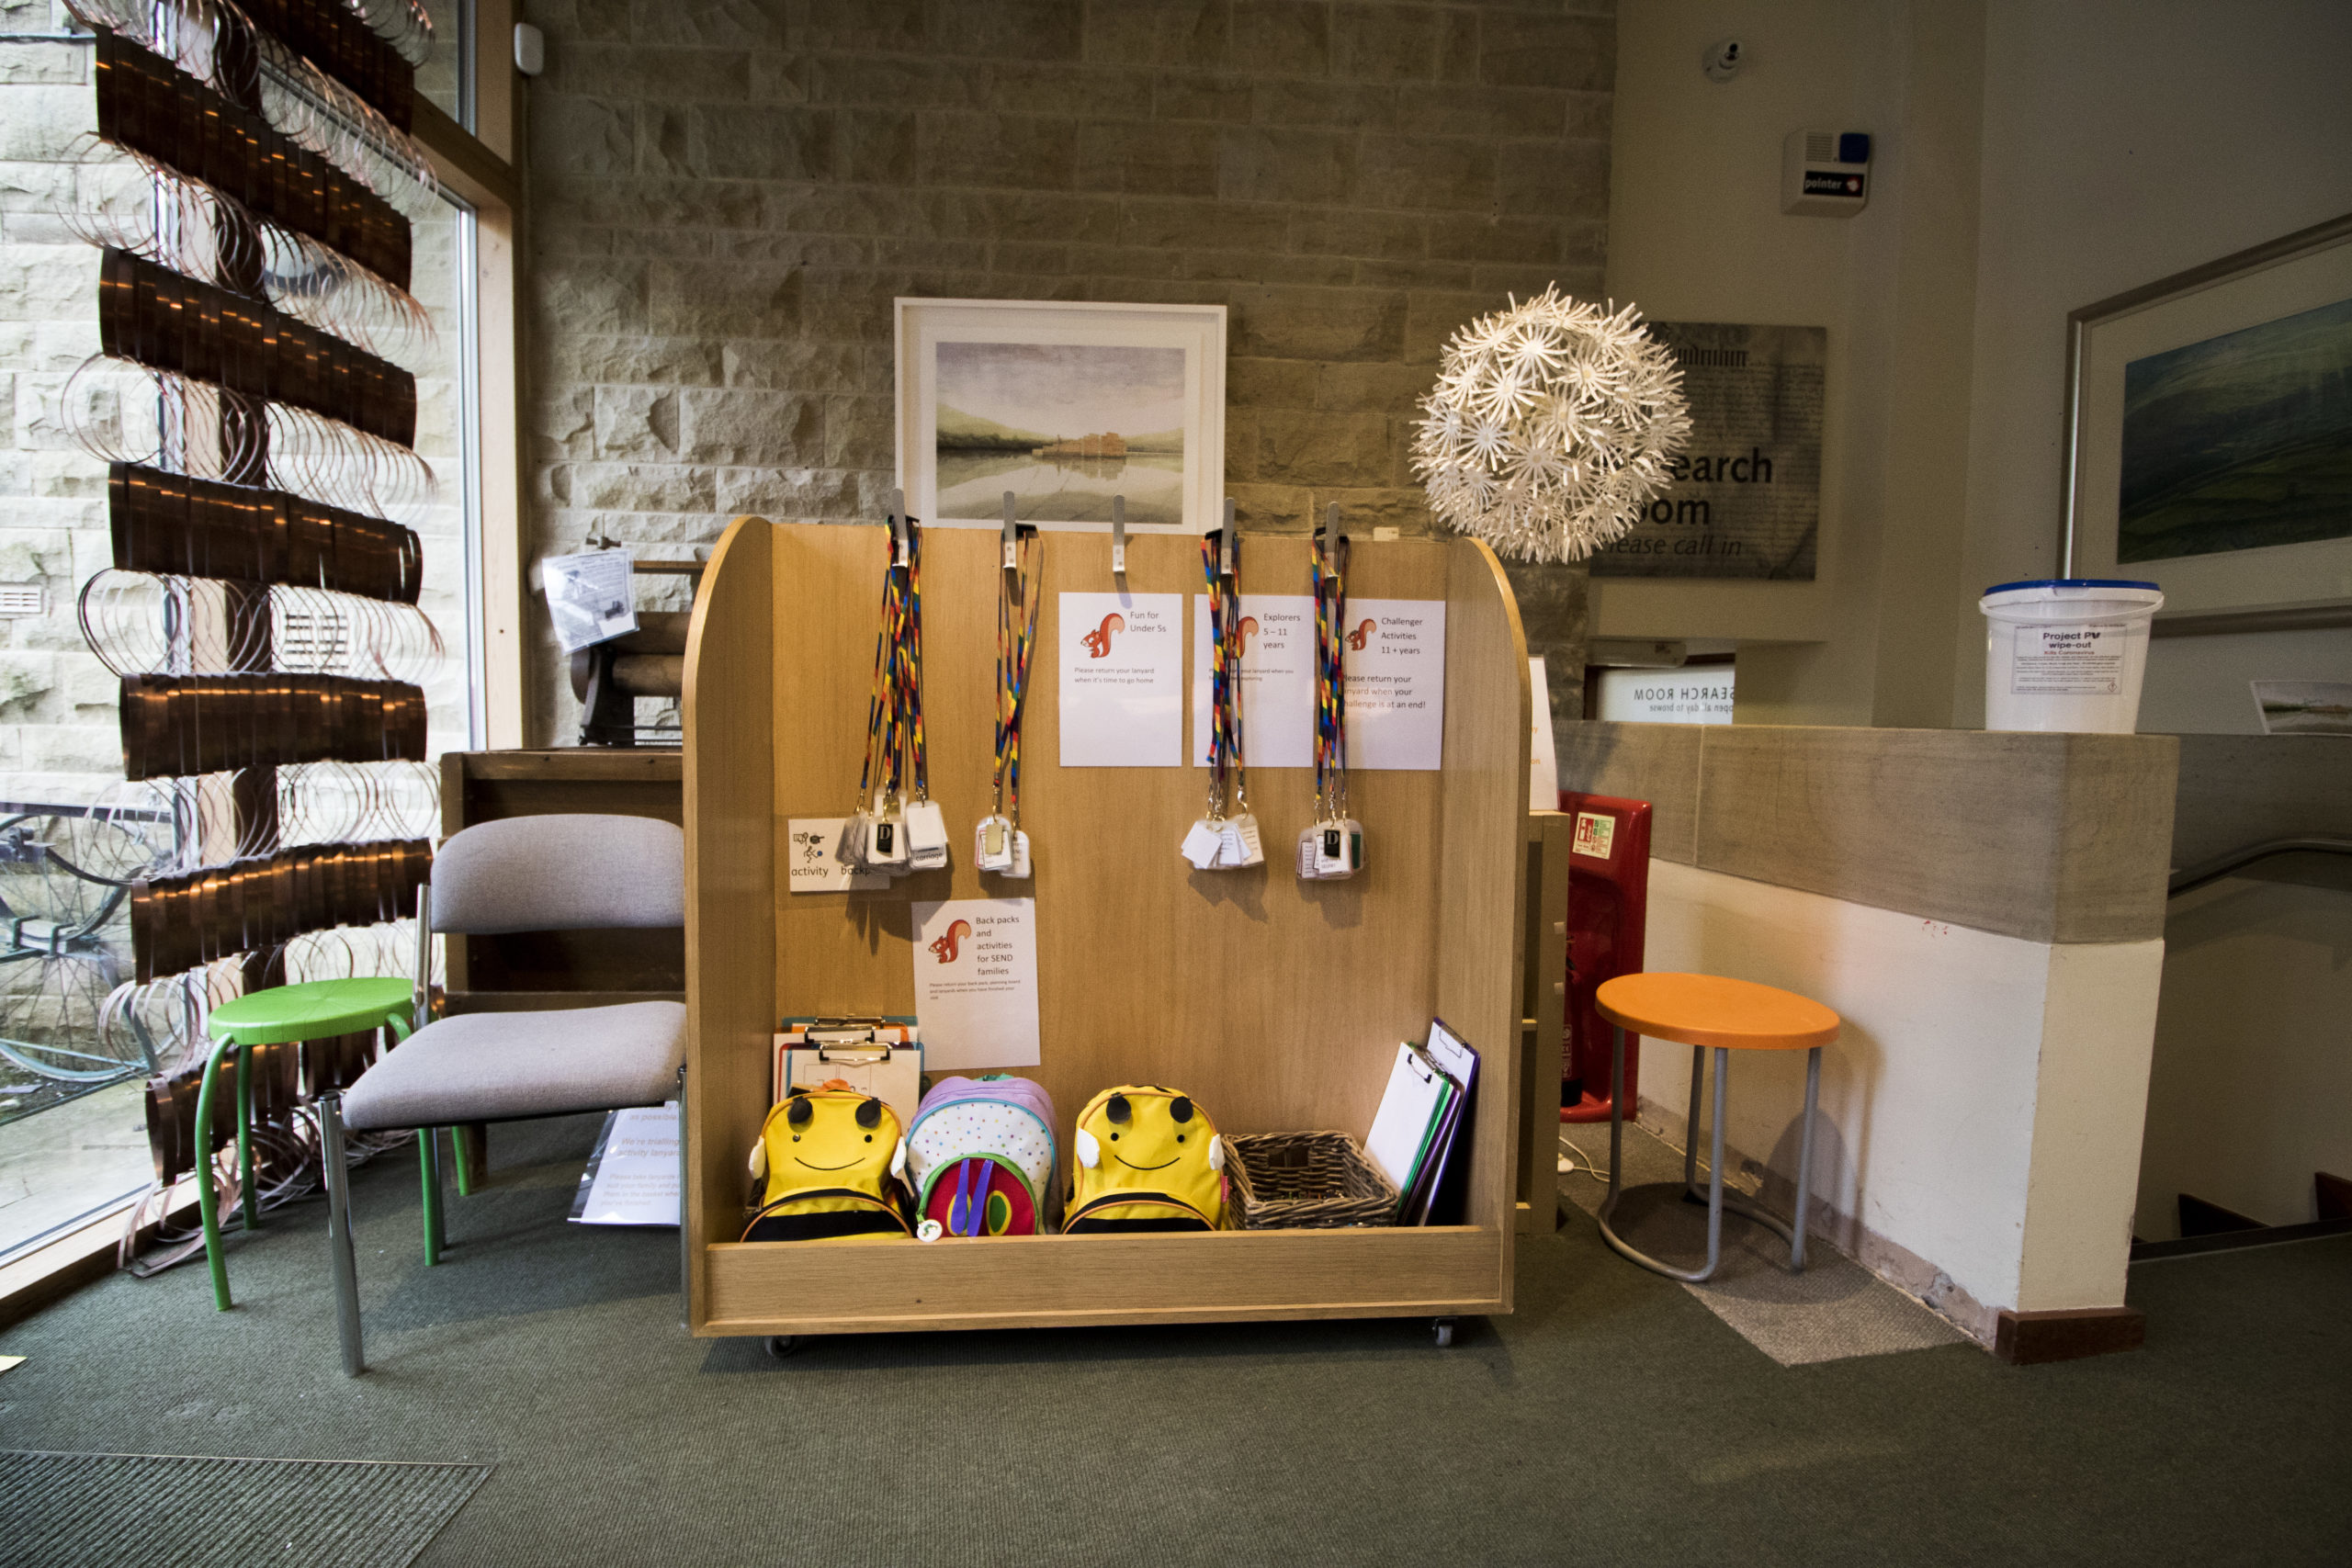 The Dales Countryside Museum foyer filled with resources, lanyards and backpacks.